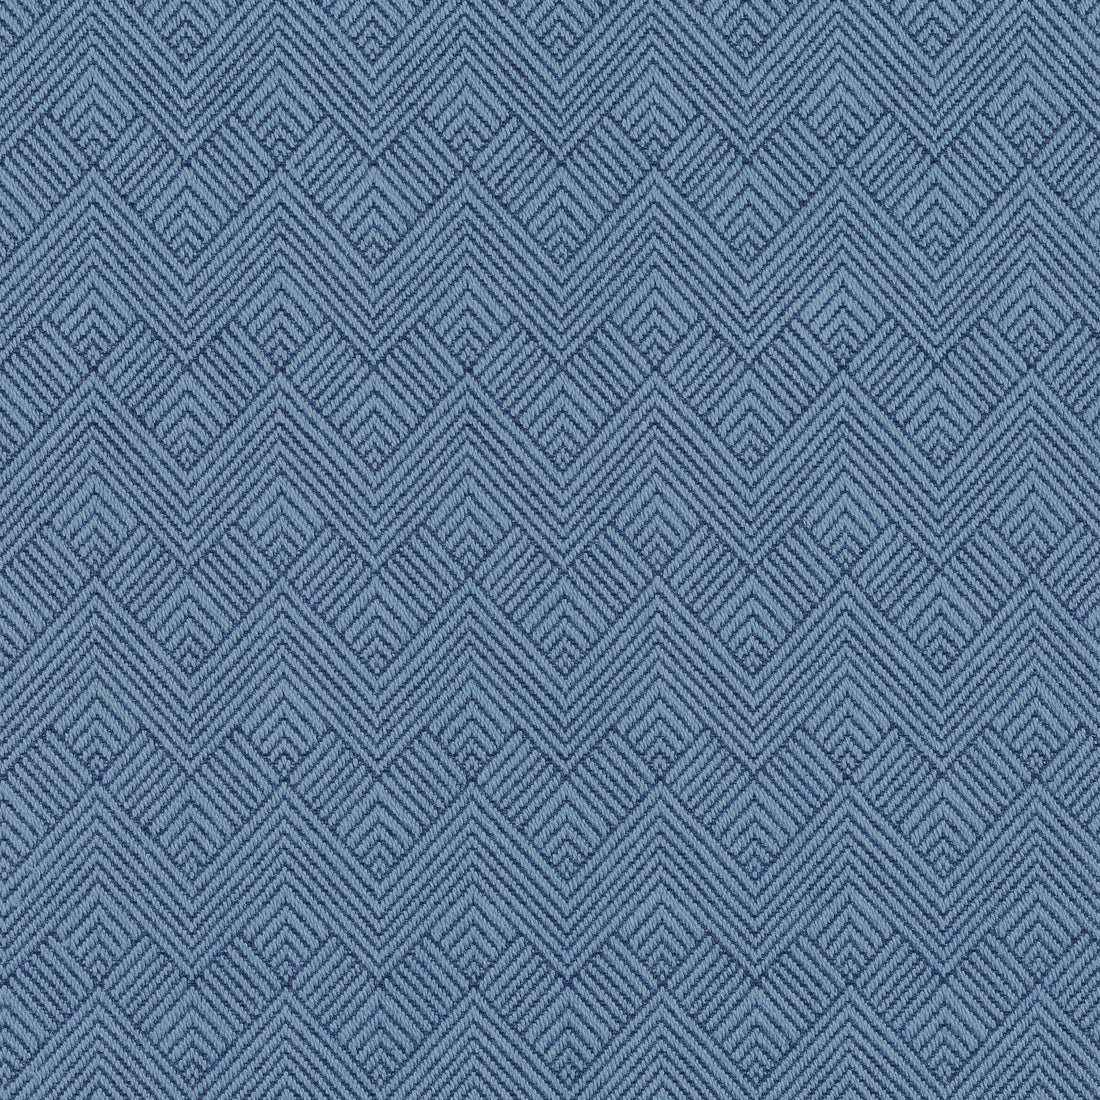 Maddox fabric in true blue color - pattern number W73337 - by Thibaut in the Nomad collection